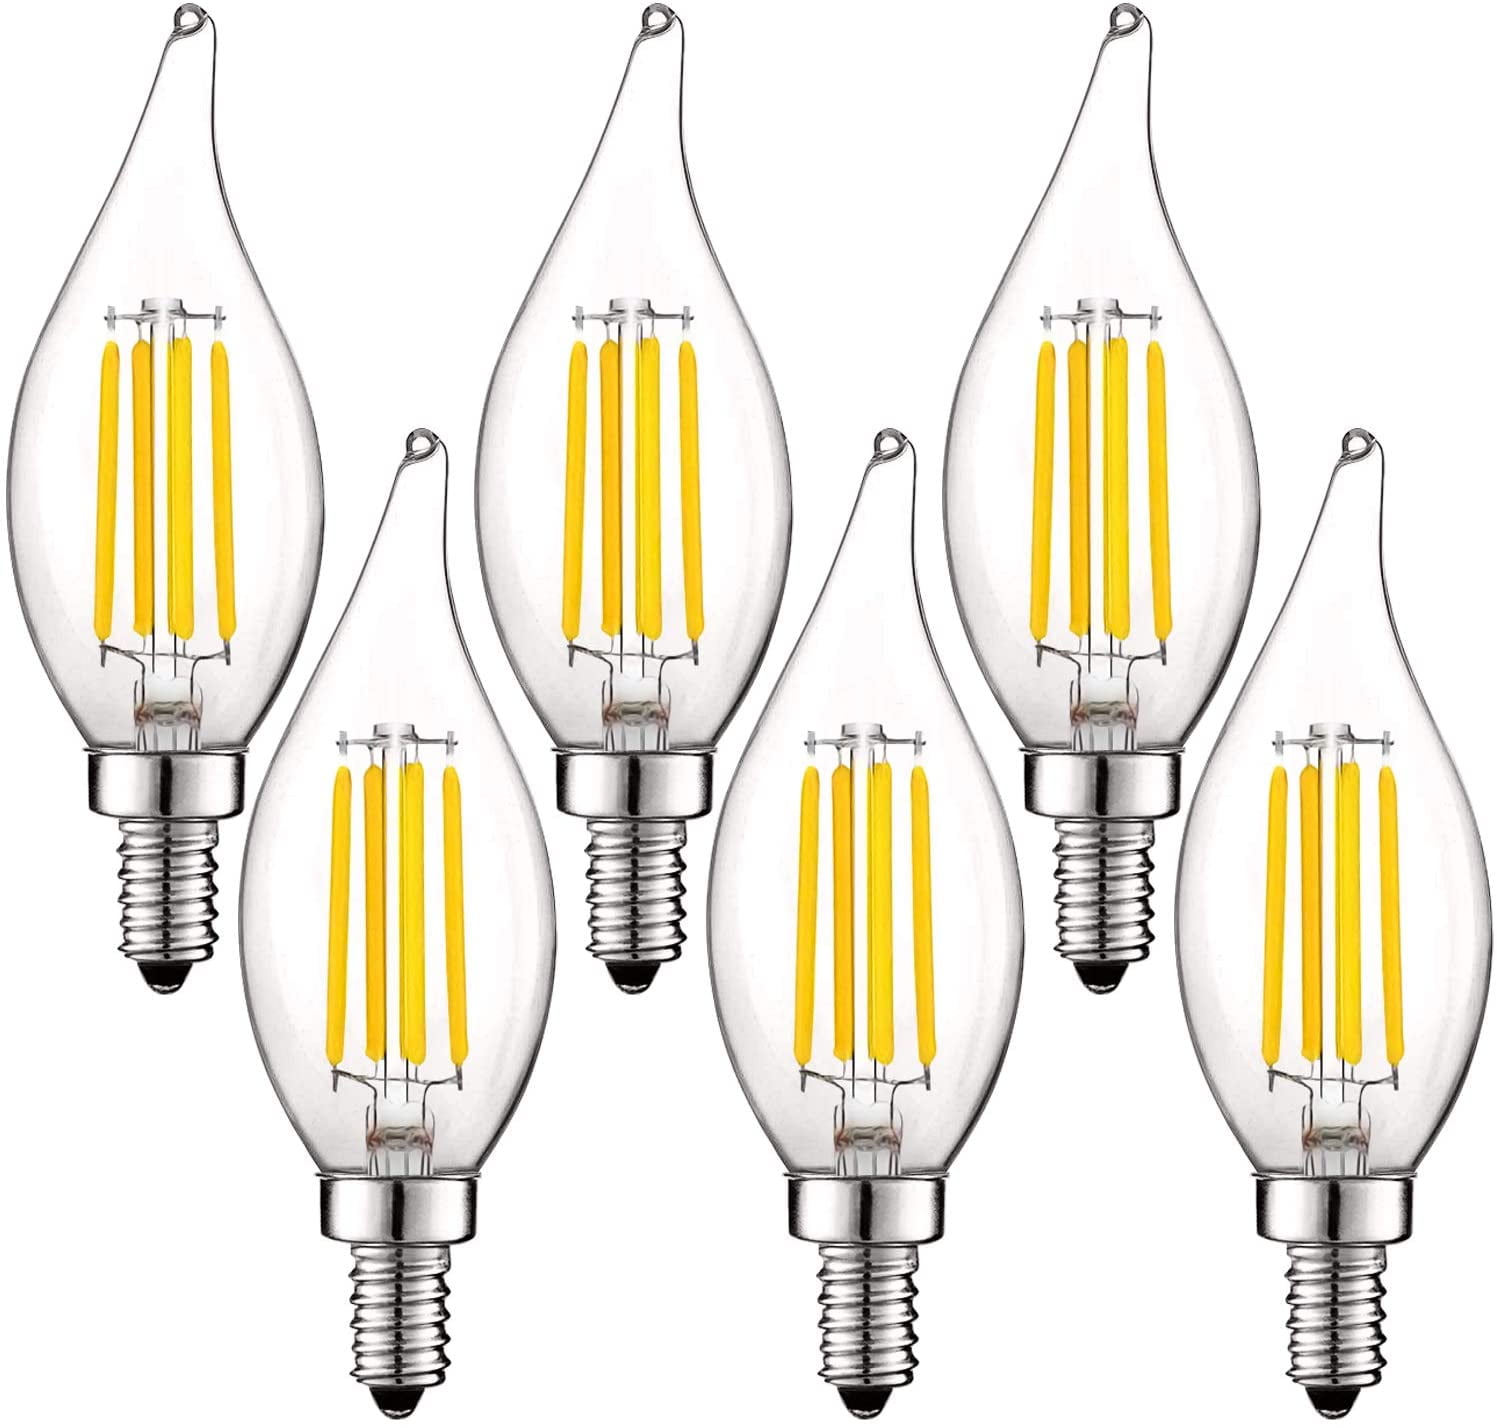 4000K Cool White LED Chandelier Light Bulbs 5W 550 Lumens Luxrite Vintage Candelabra LED Bulb 60W Equivalent Dimmable Filament LED Candle Bulbs E12 Base 12 Pack Flame Tip Clear Glass 